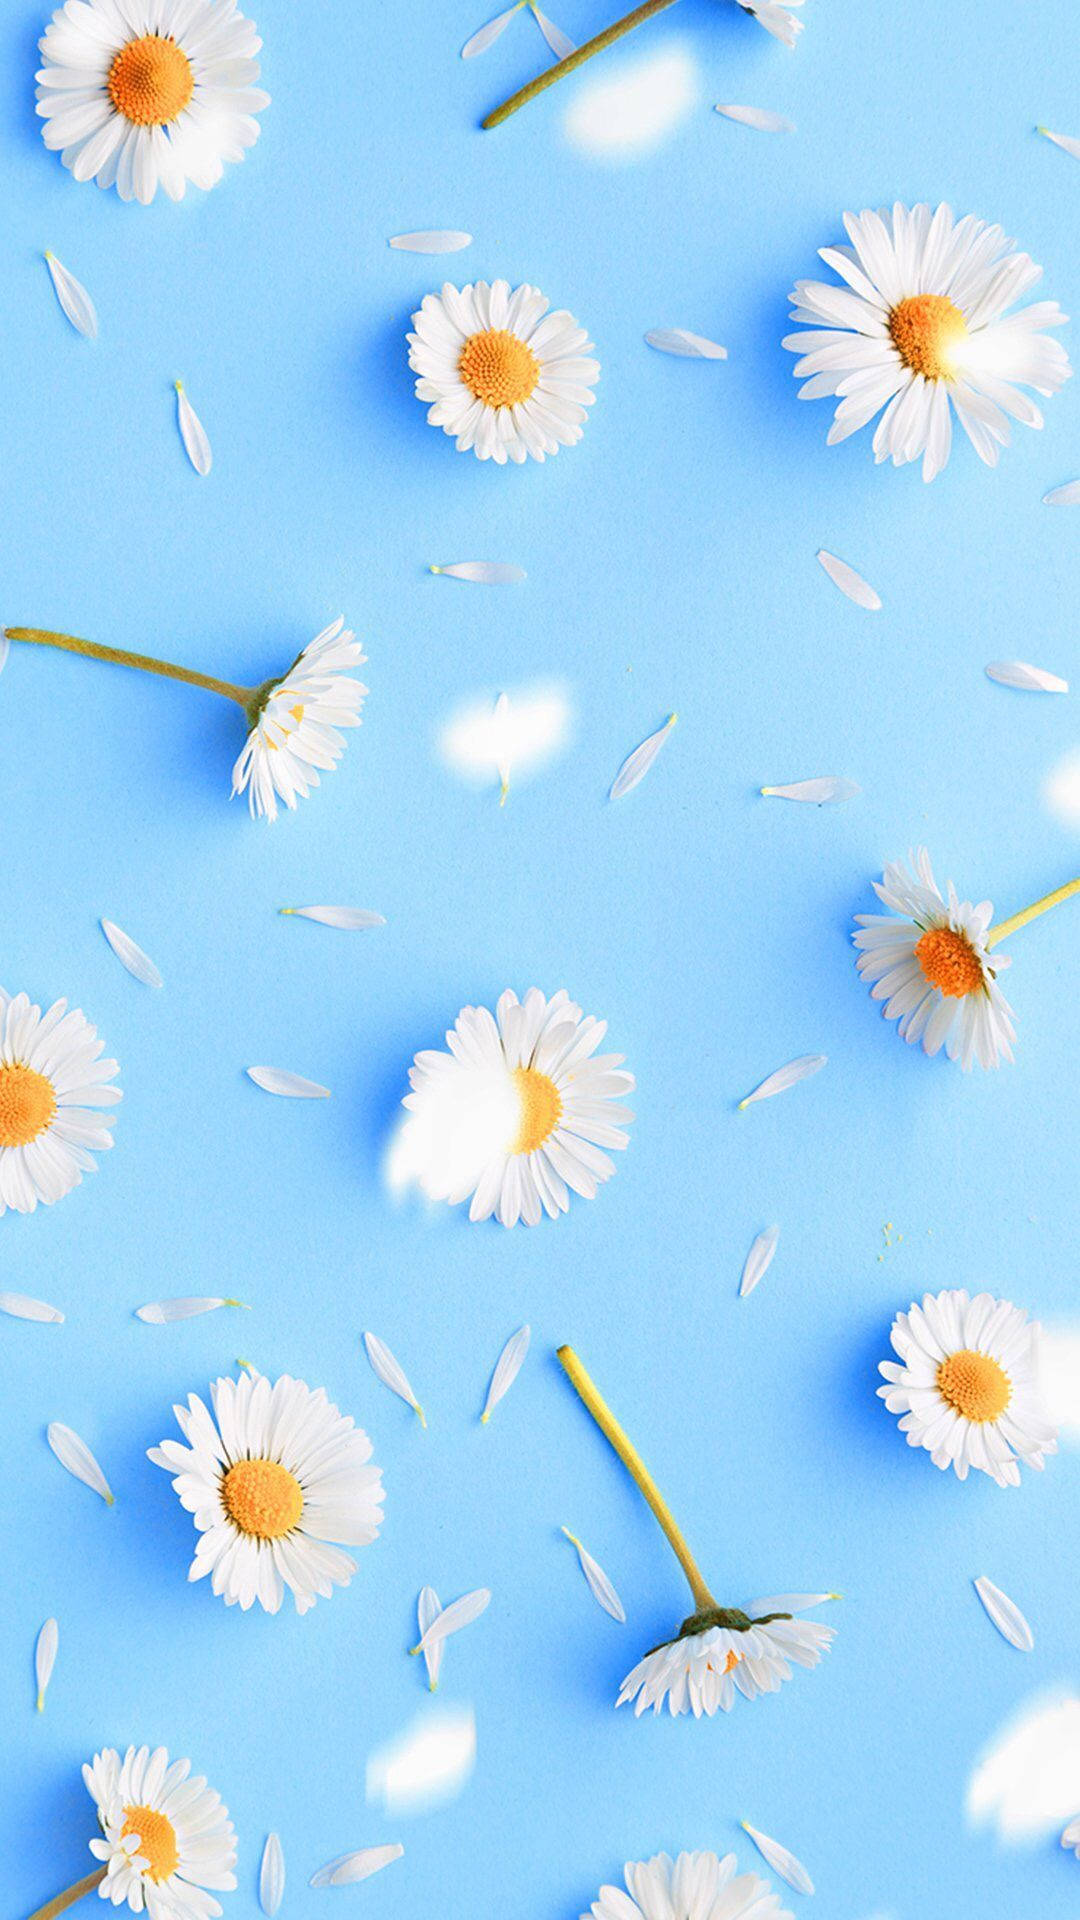 Daisy Iphone On Pastel Blue Surface Background